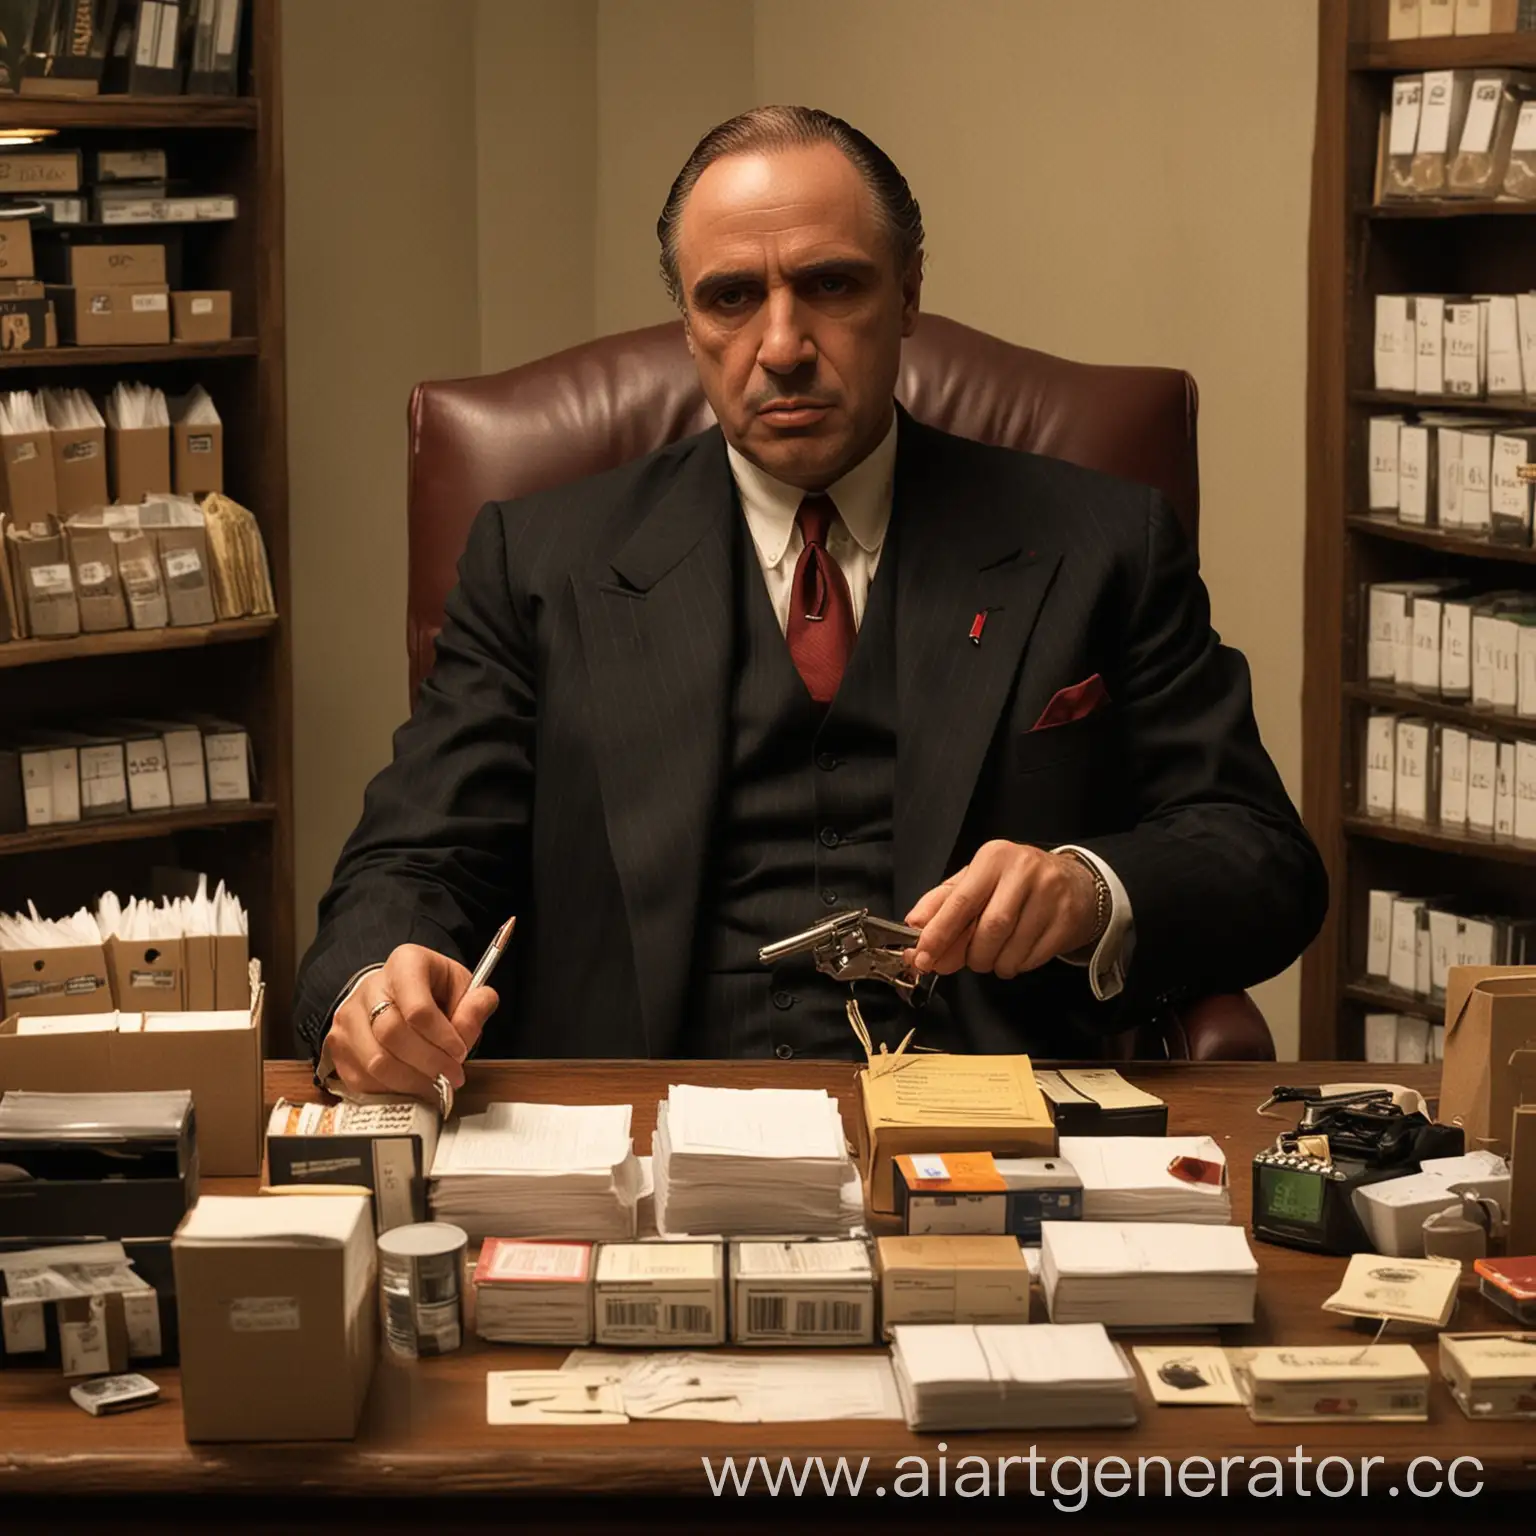 The-Godfather-Purchases-Office-Supplies-for-His-Empires-Operations